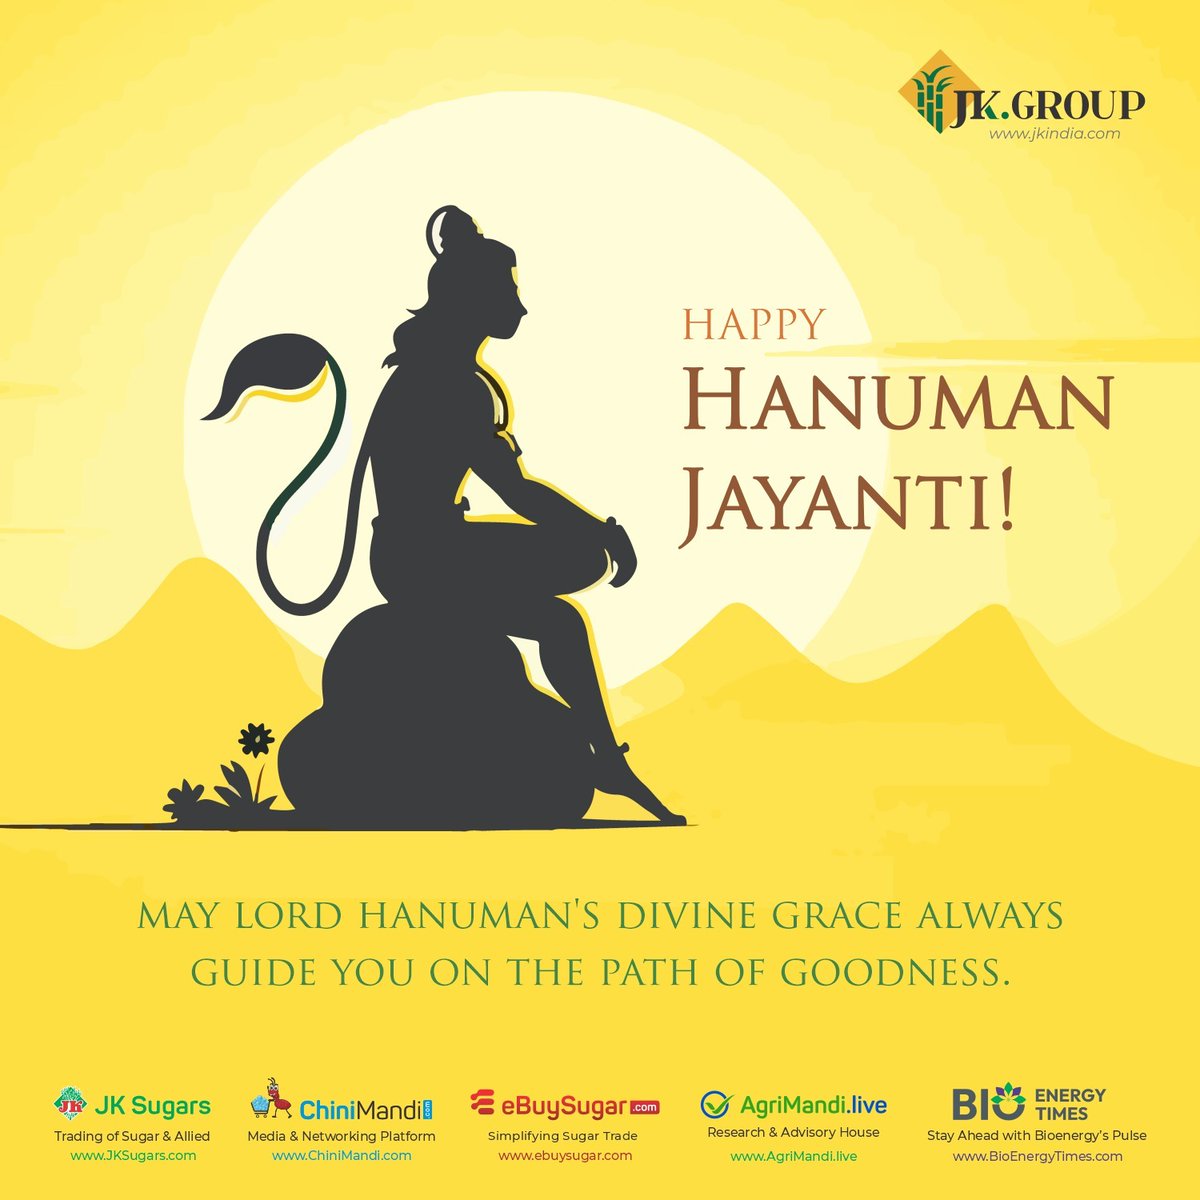 May Lord Hanuman give you wisdom, strength, and courage to face challenges and live a happy, peaceful life. Happy Hanuman Jayanti!🙏#hanumanjayanti #festival #India #JKGroup #Indianfestival @ChiniMandi @eBuySugar @AgriMandiLive @BioenergyTimes